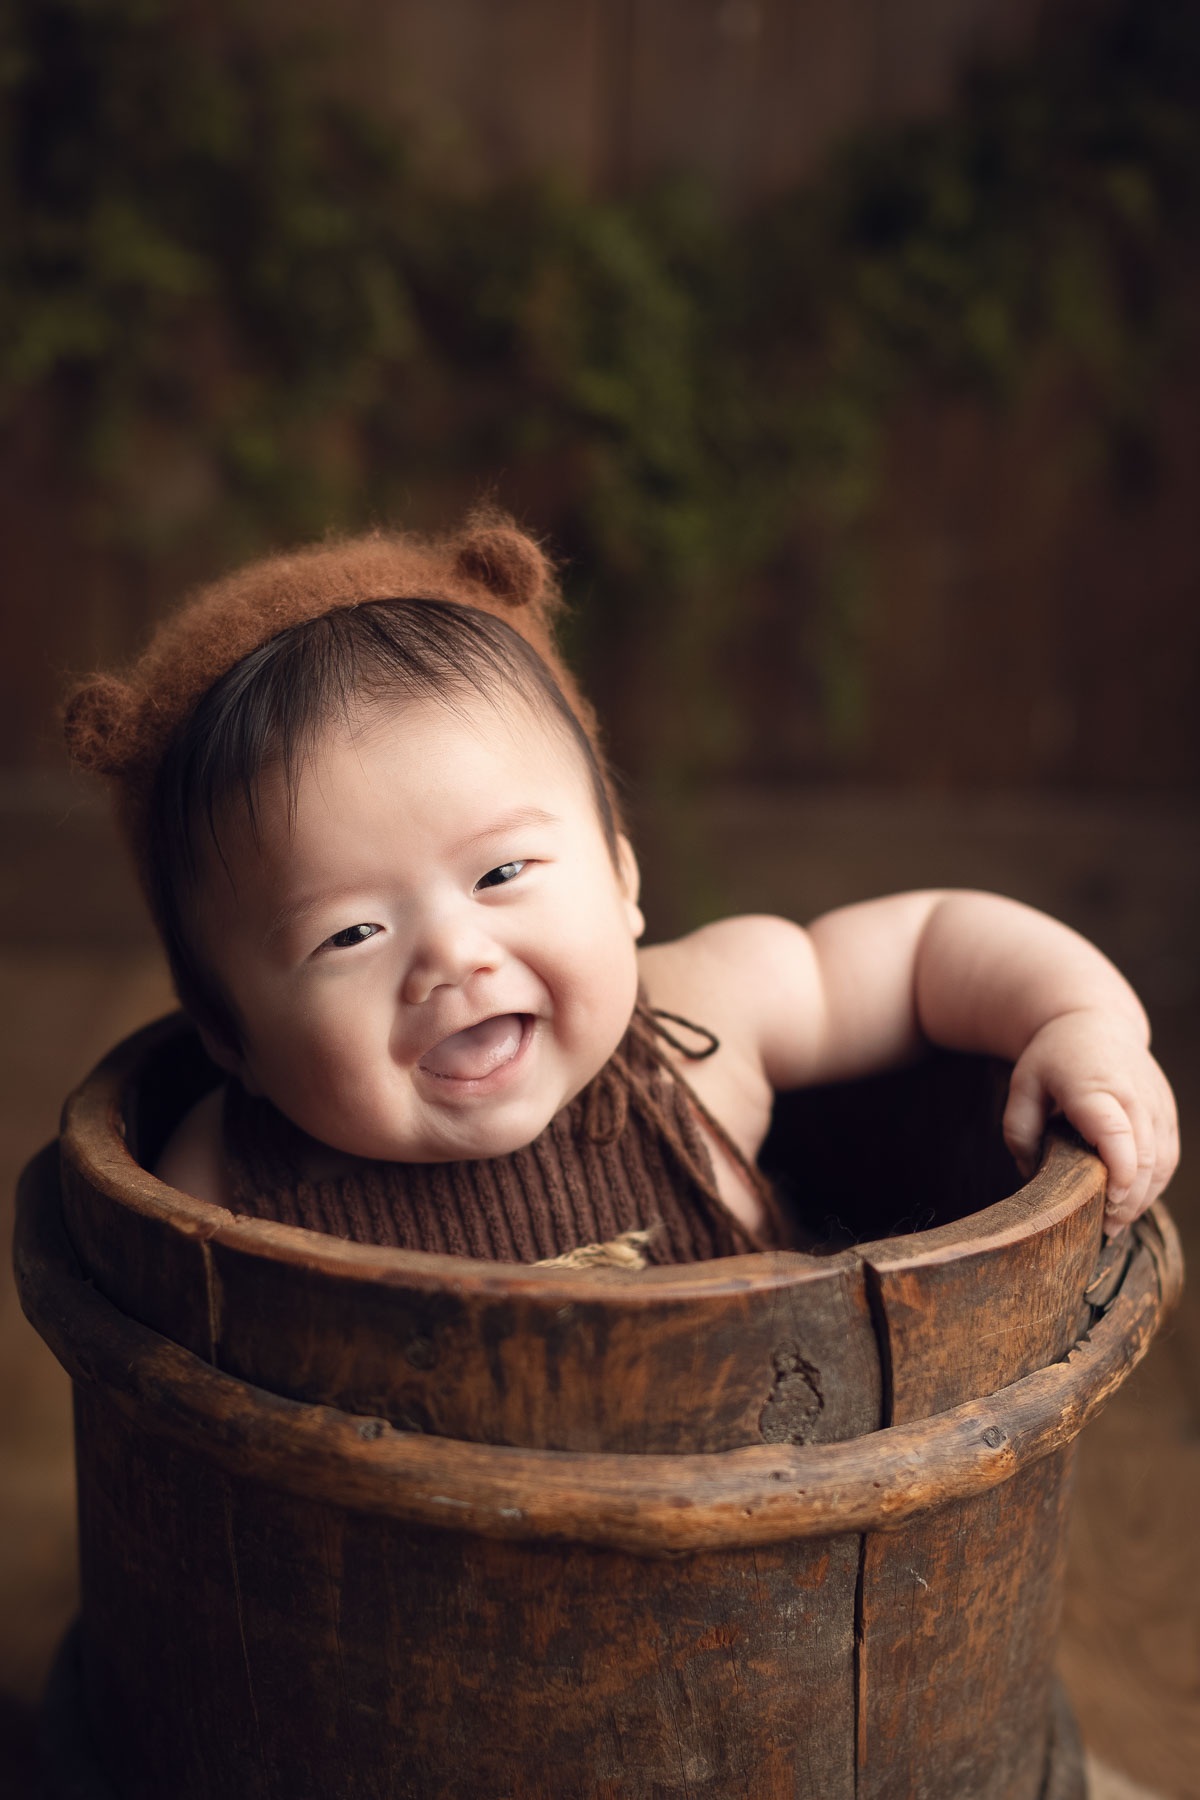 100 days old baby boy smiling in a brown bucket